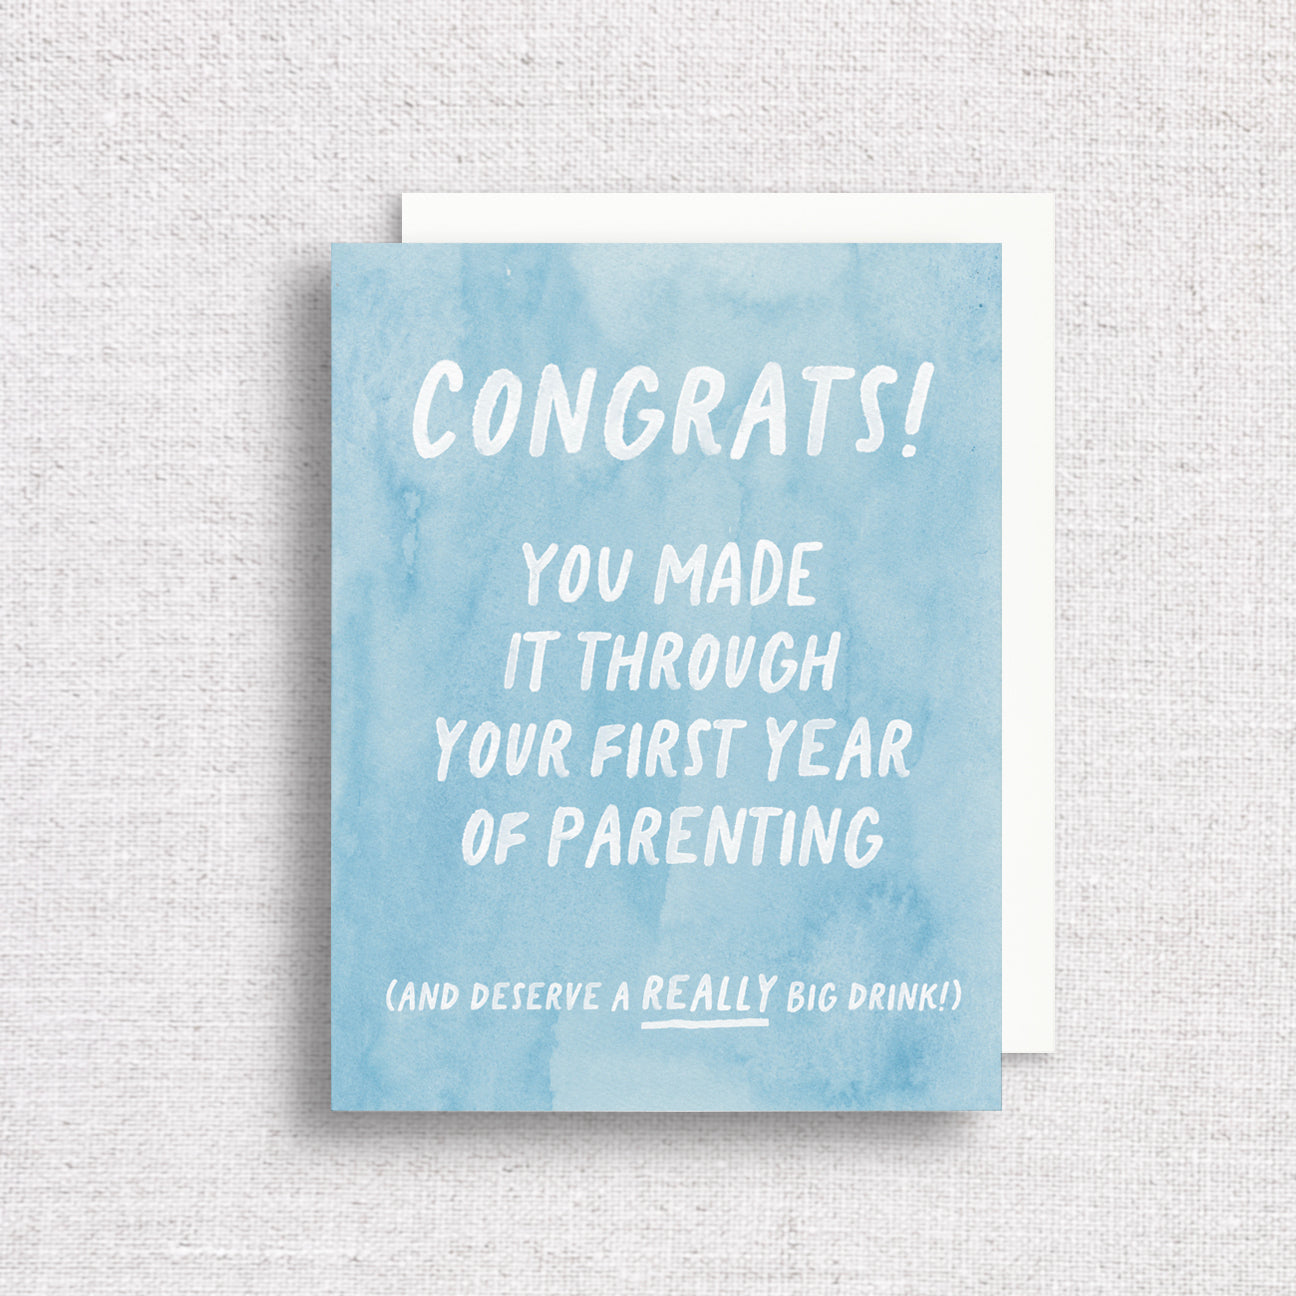 Congrats on Your First Year of Parenting Greeting Card by Gert & Co